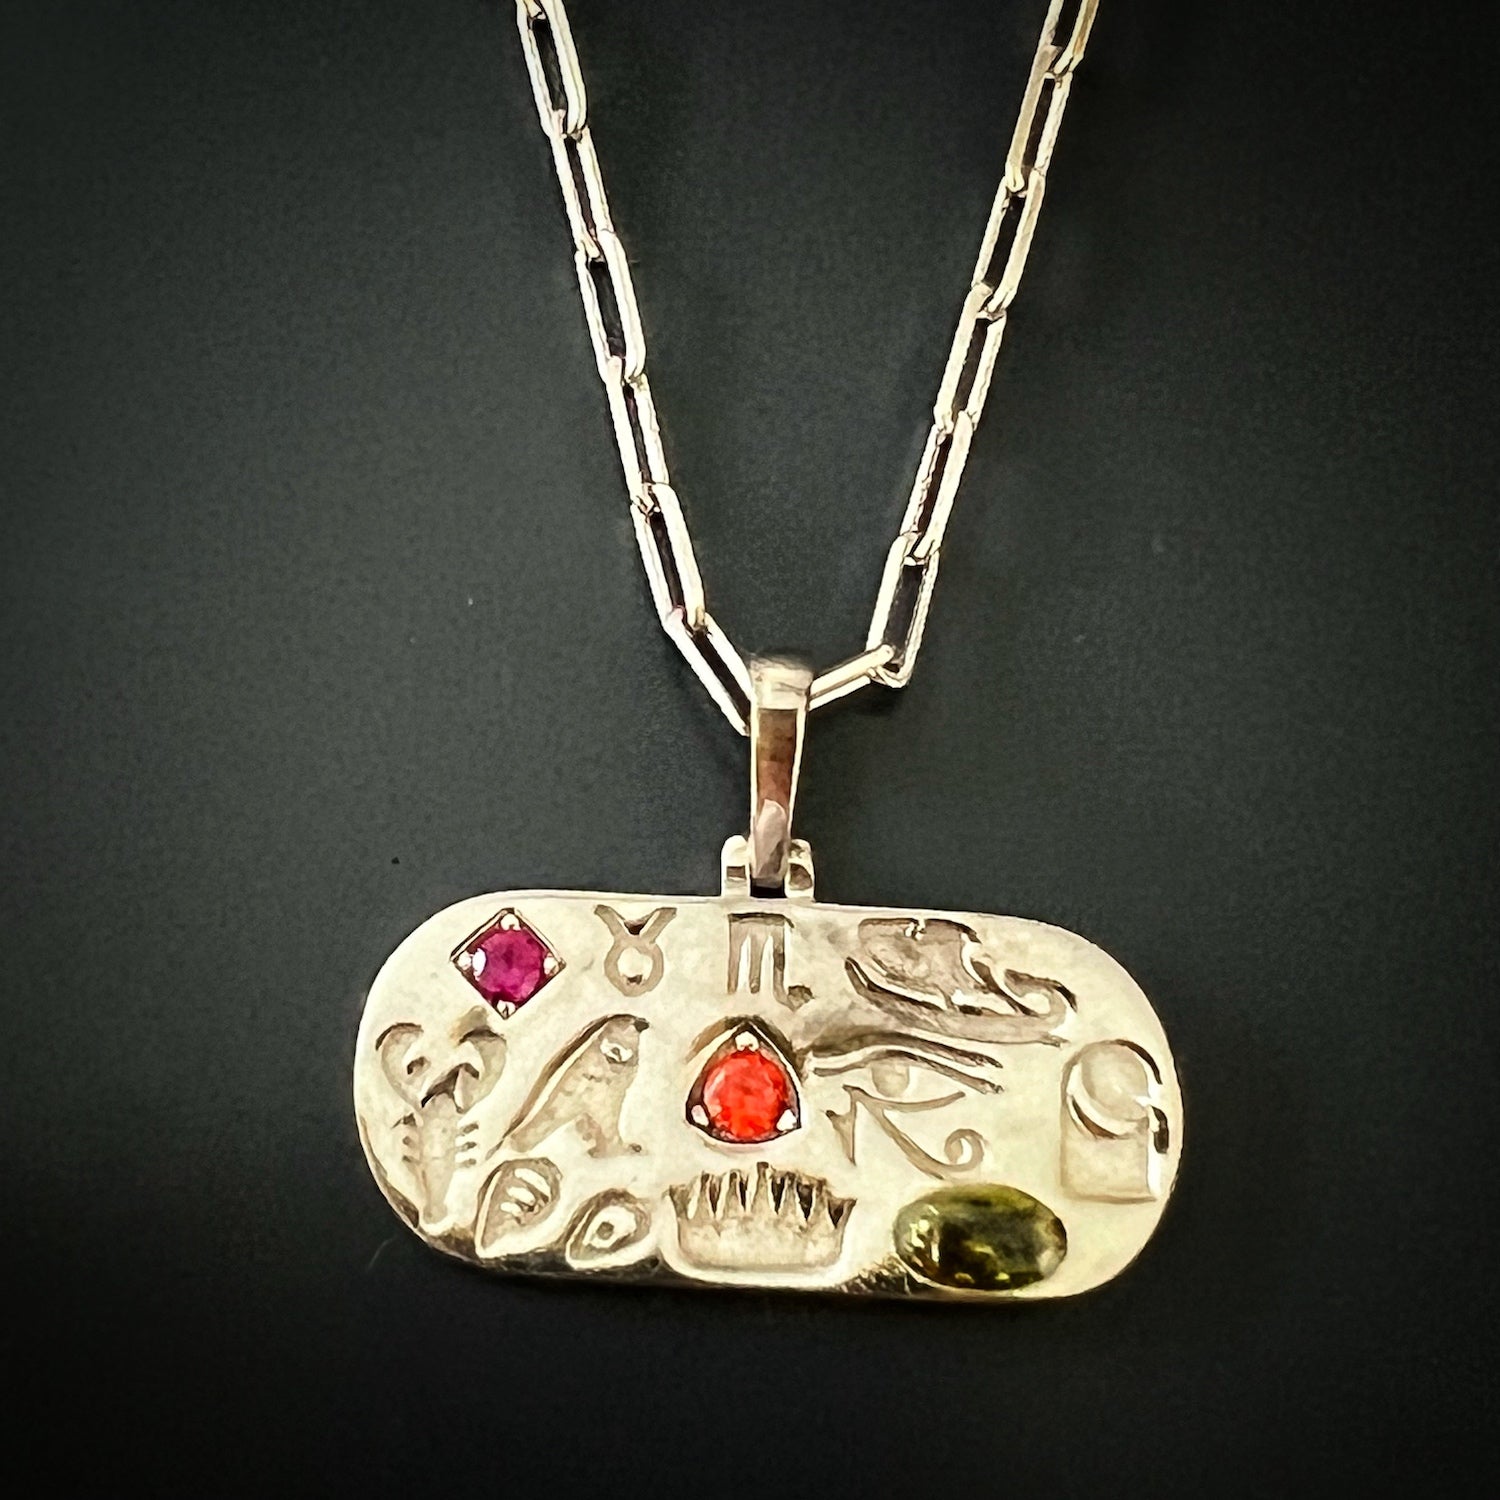 Egyptian Symbols Silver Necklace, showcasing the beauty and significance of ancient Egyptian symbols.